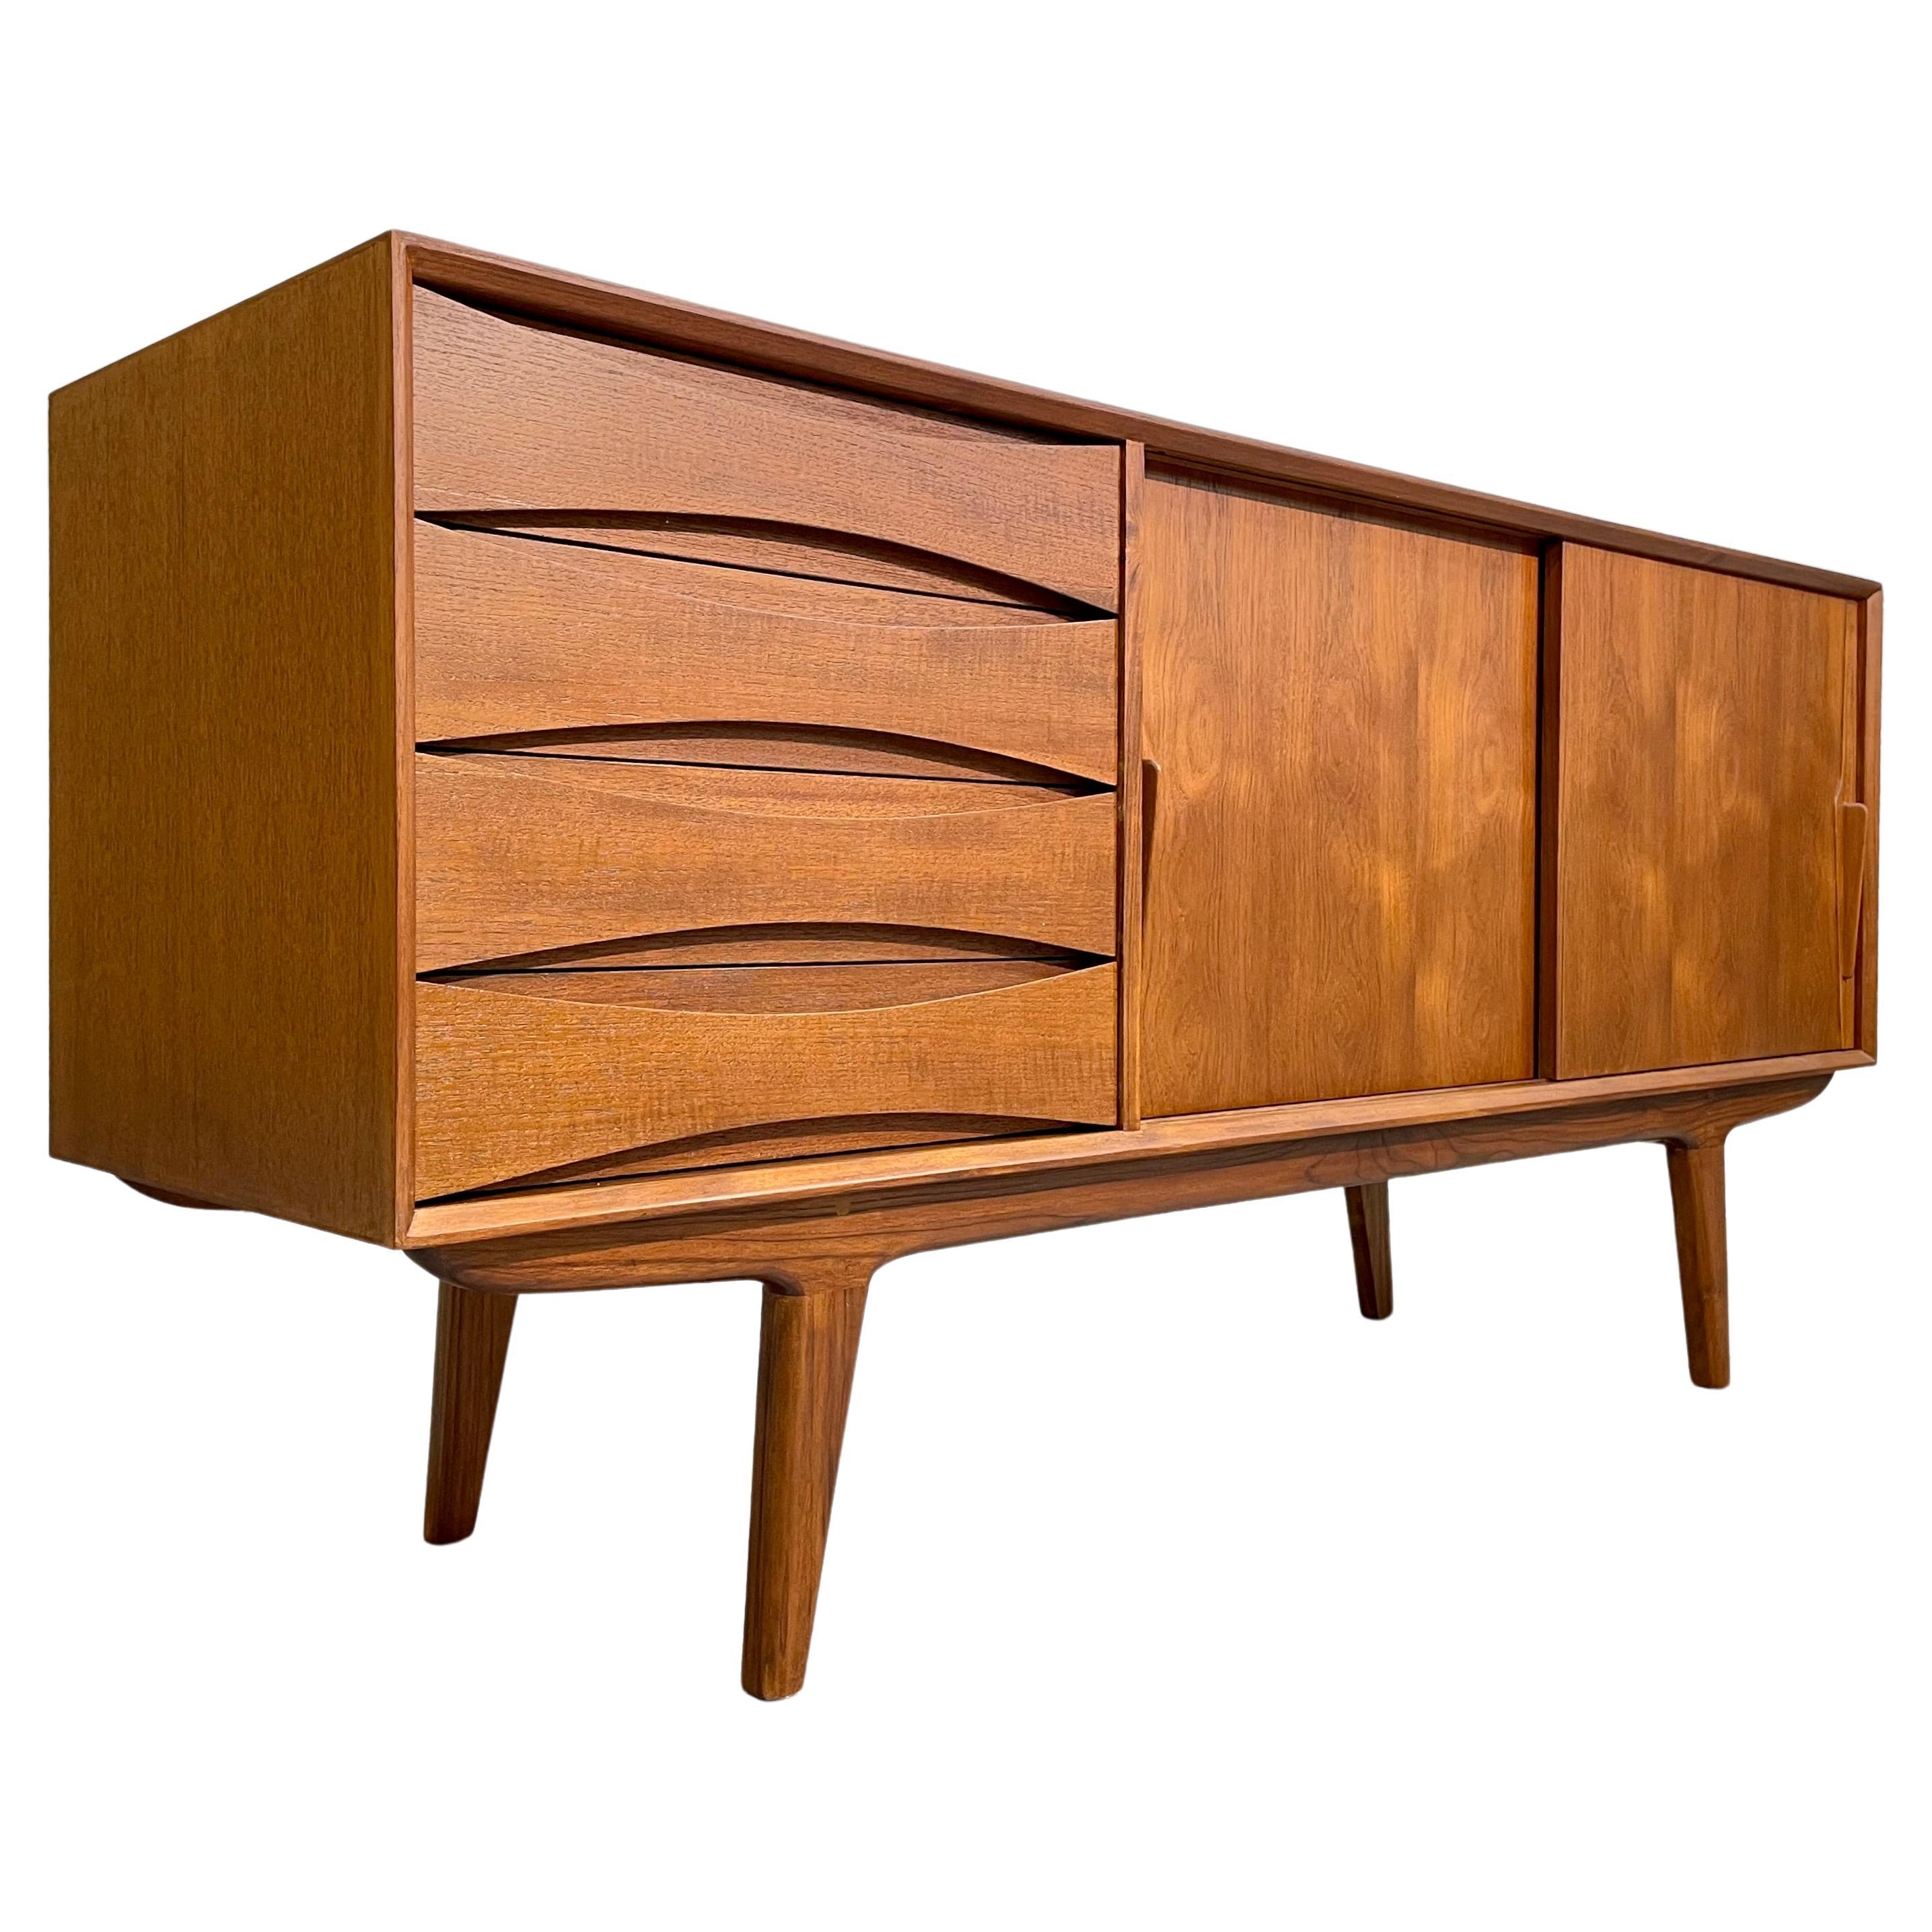 Mid Century Modern styled handcrafted Credenza / Media Stand. This beauty features exquisite knife-edge hand pulls and sculpted drawer fronts with slightly splayed legs. Stunning wood grains and finished back allow you to float the credenza in a